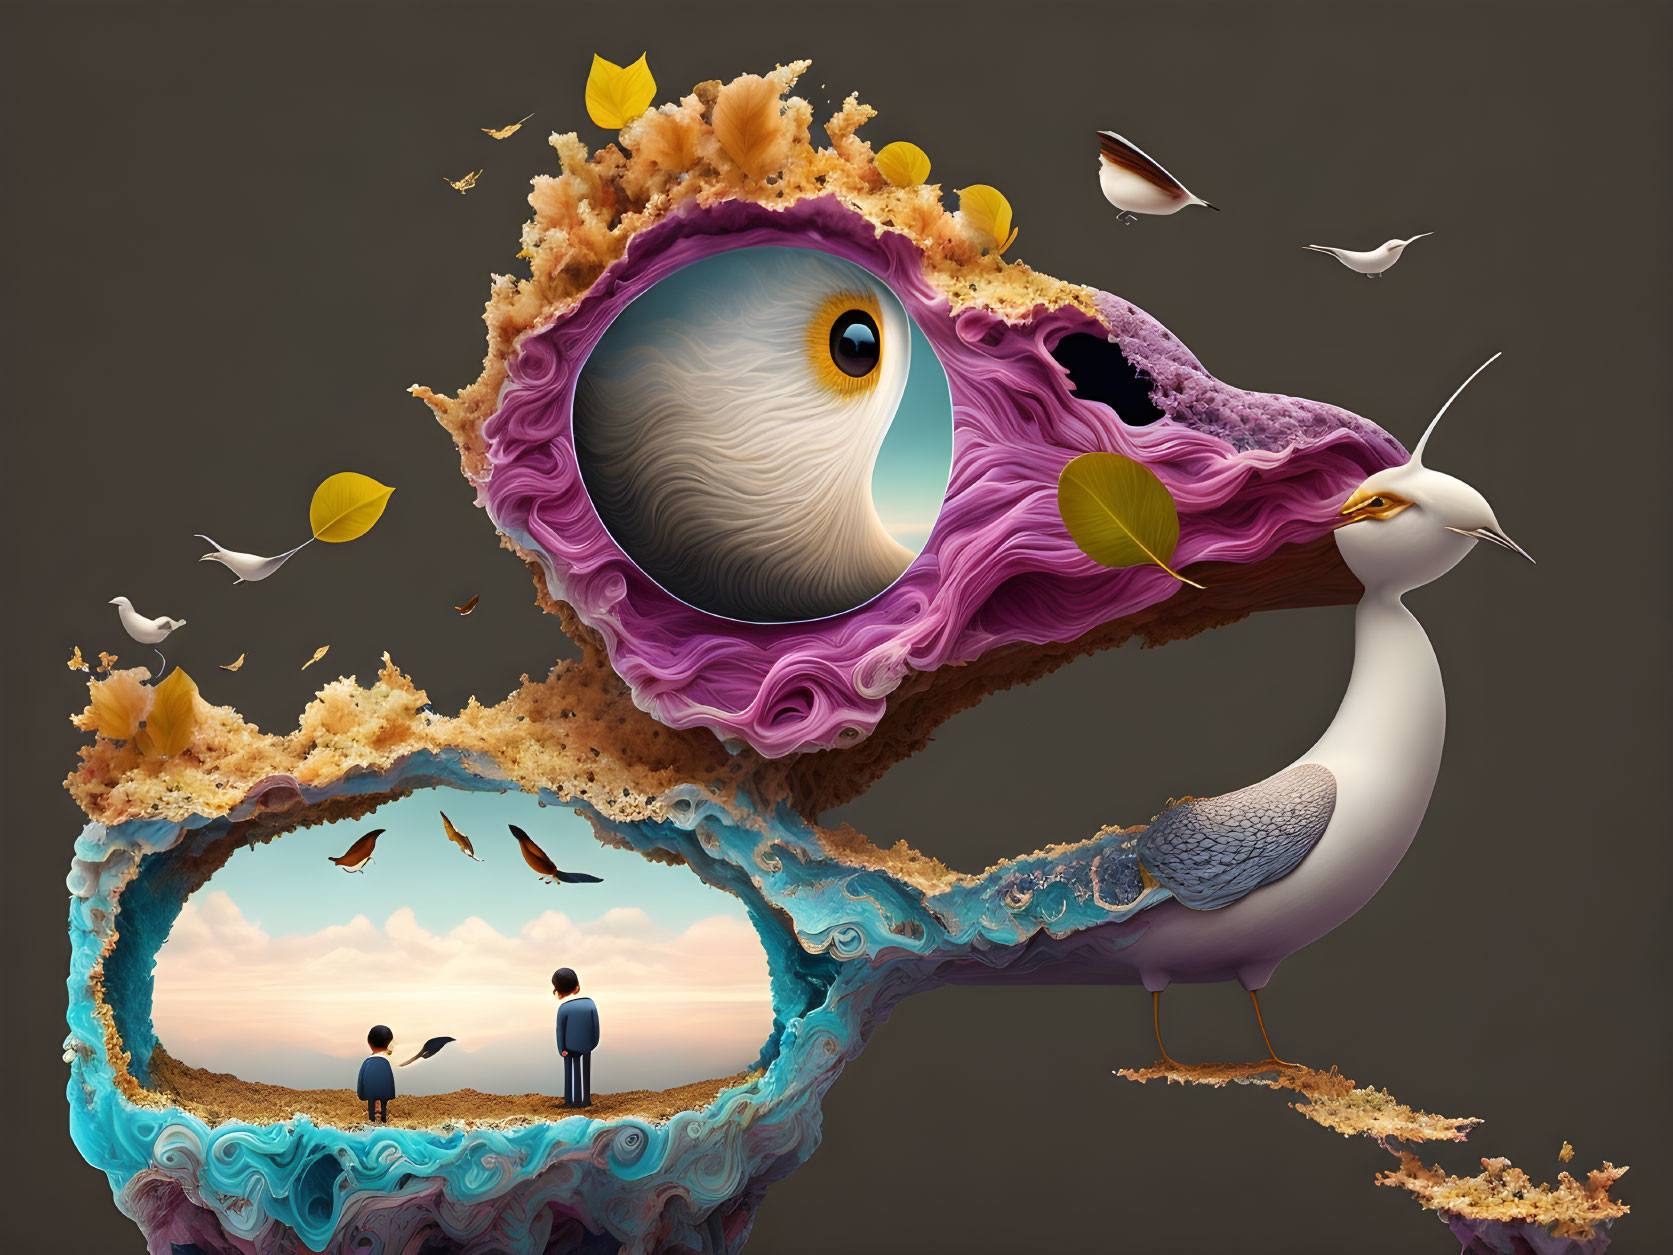 Surreal digital artwork: Seagull merges with colorful rock formations, two people view seascape